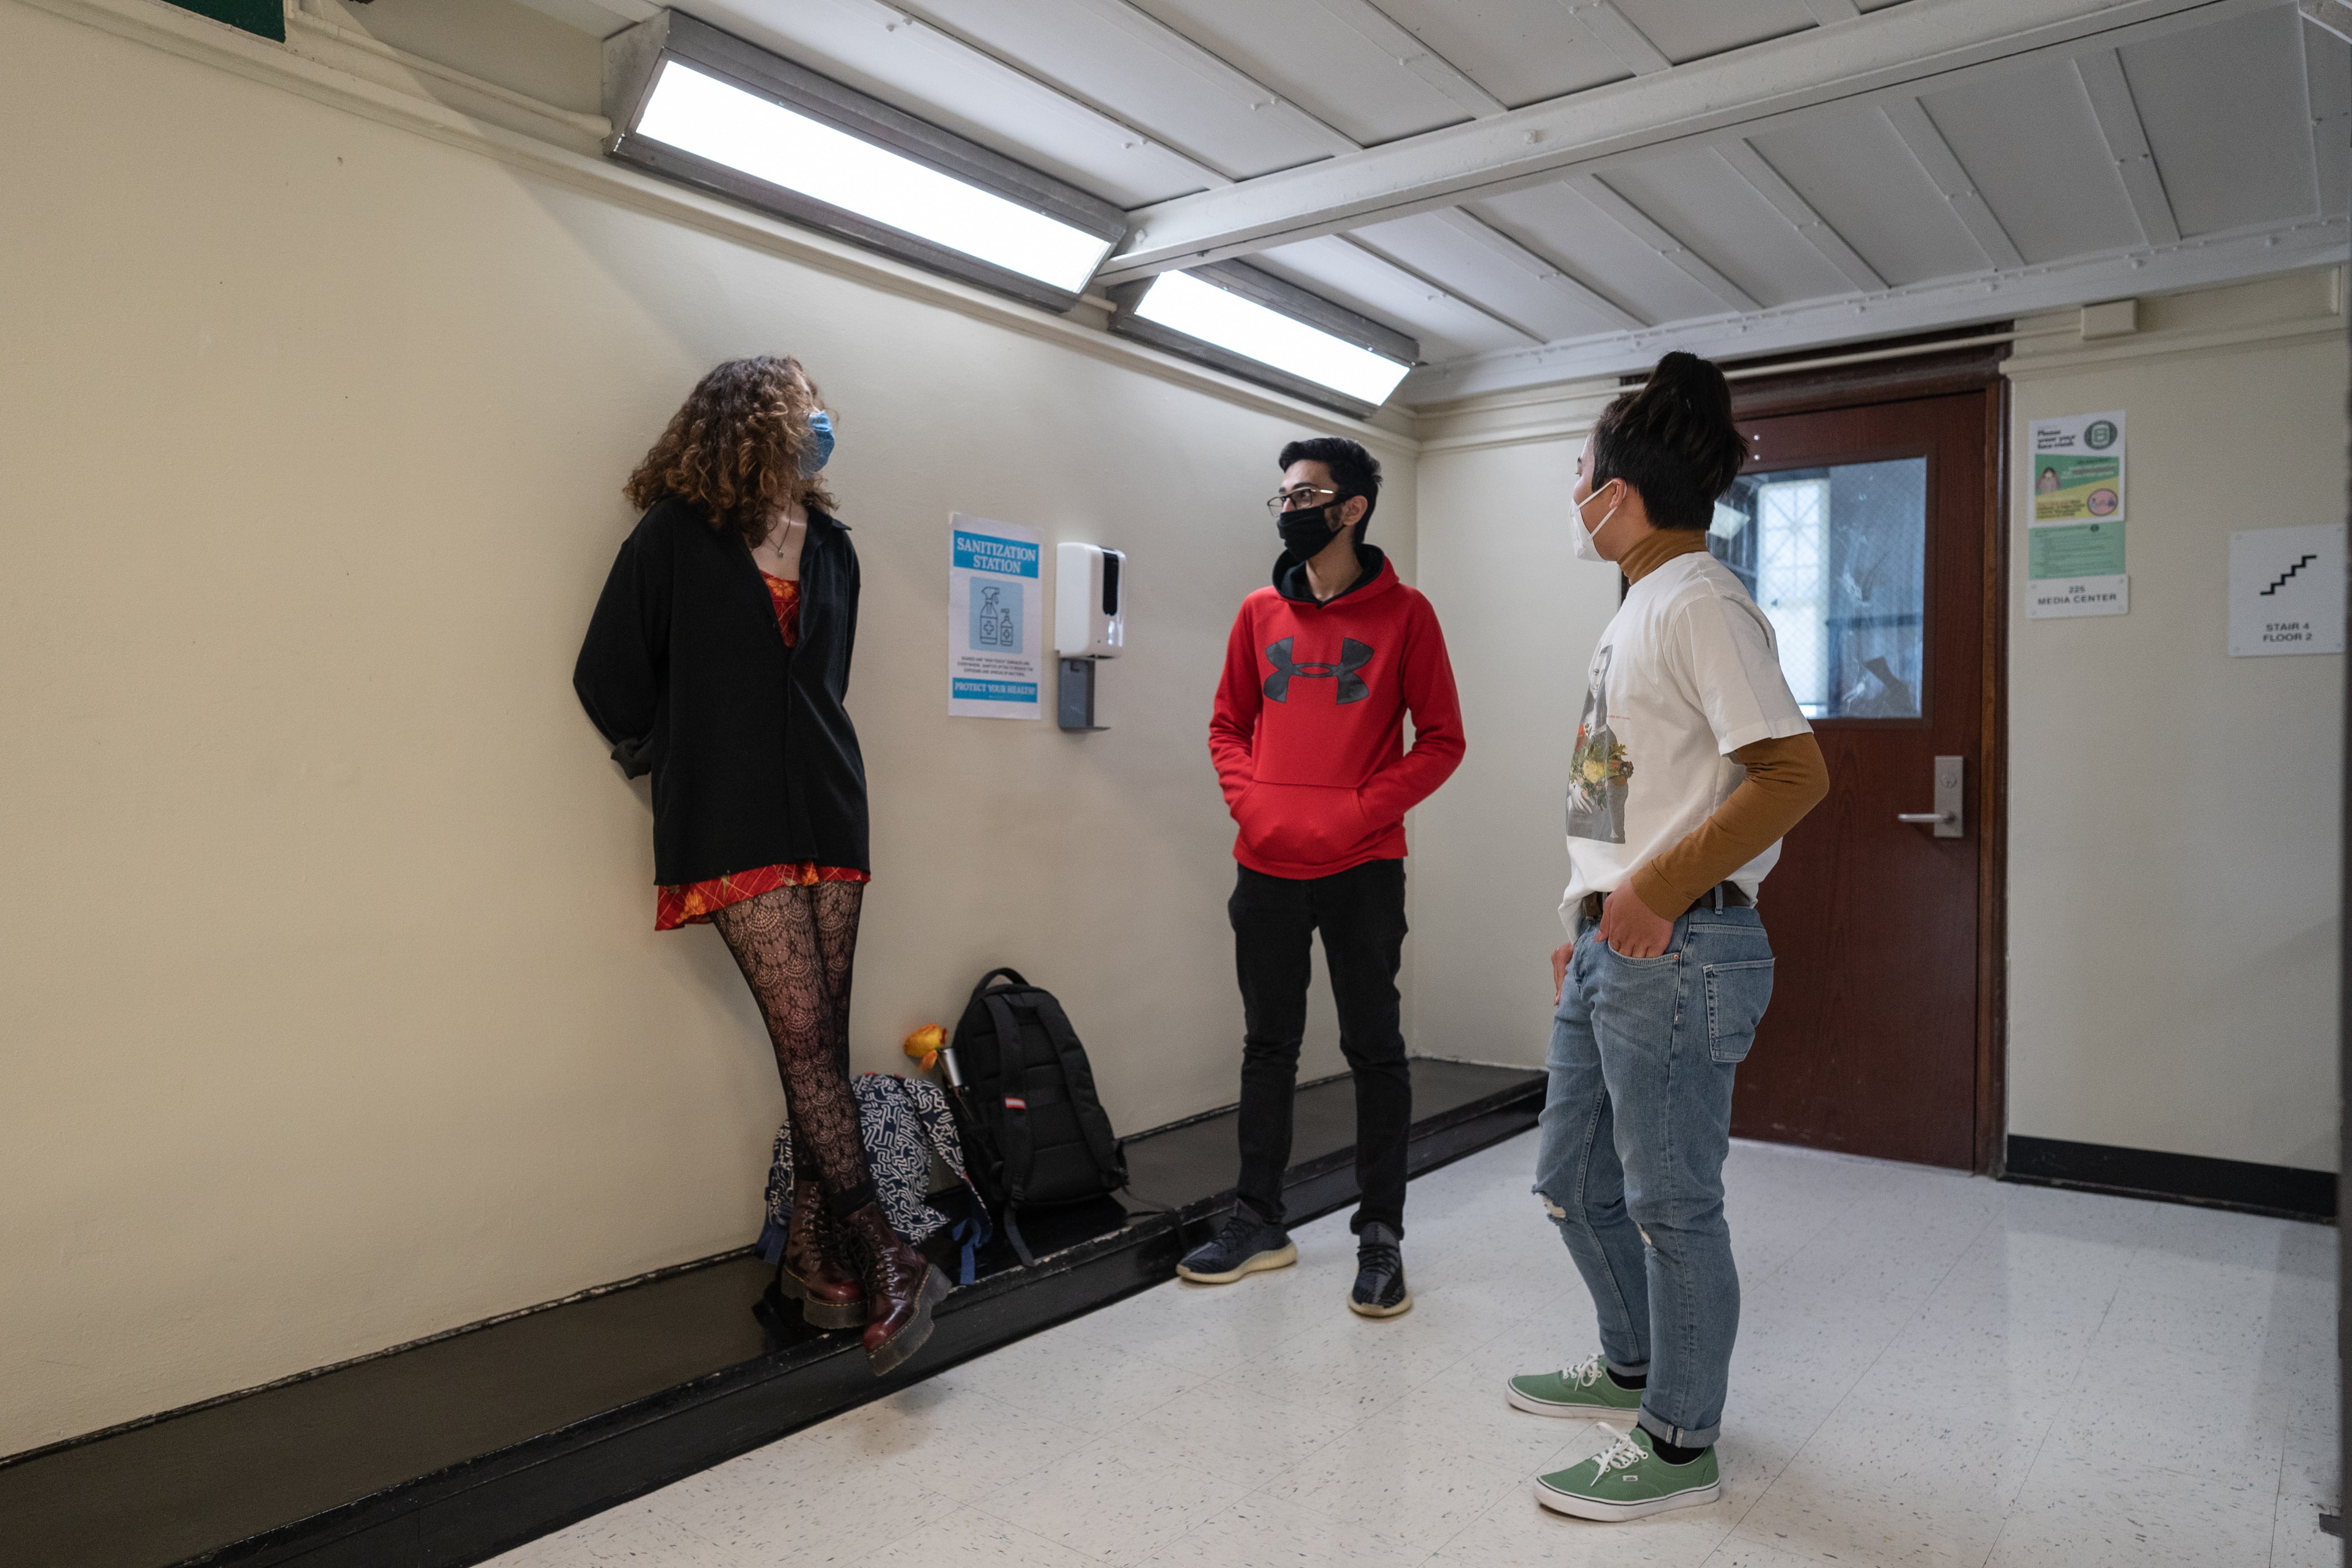 Students, including Muhammad Khan at center, chat in the hallway on the first week back to classrooms on April 23, 2021.